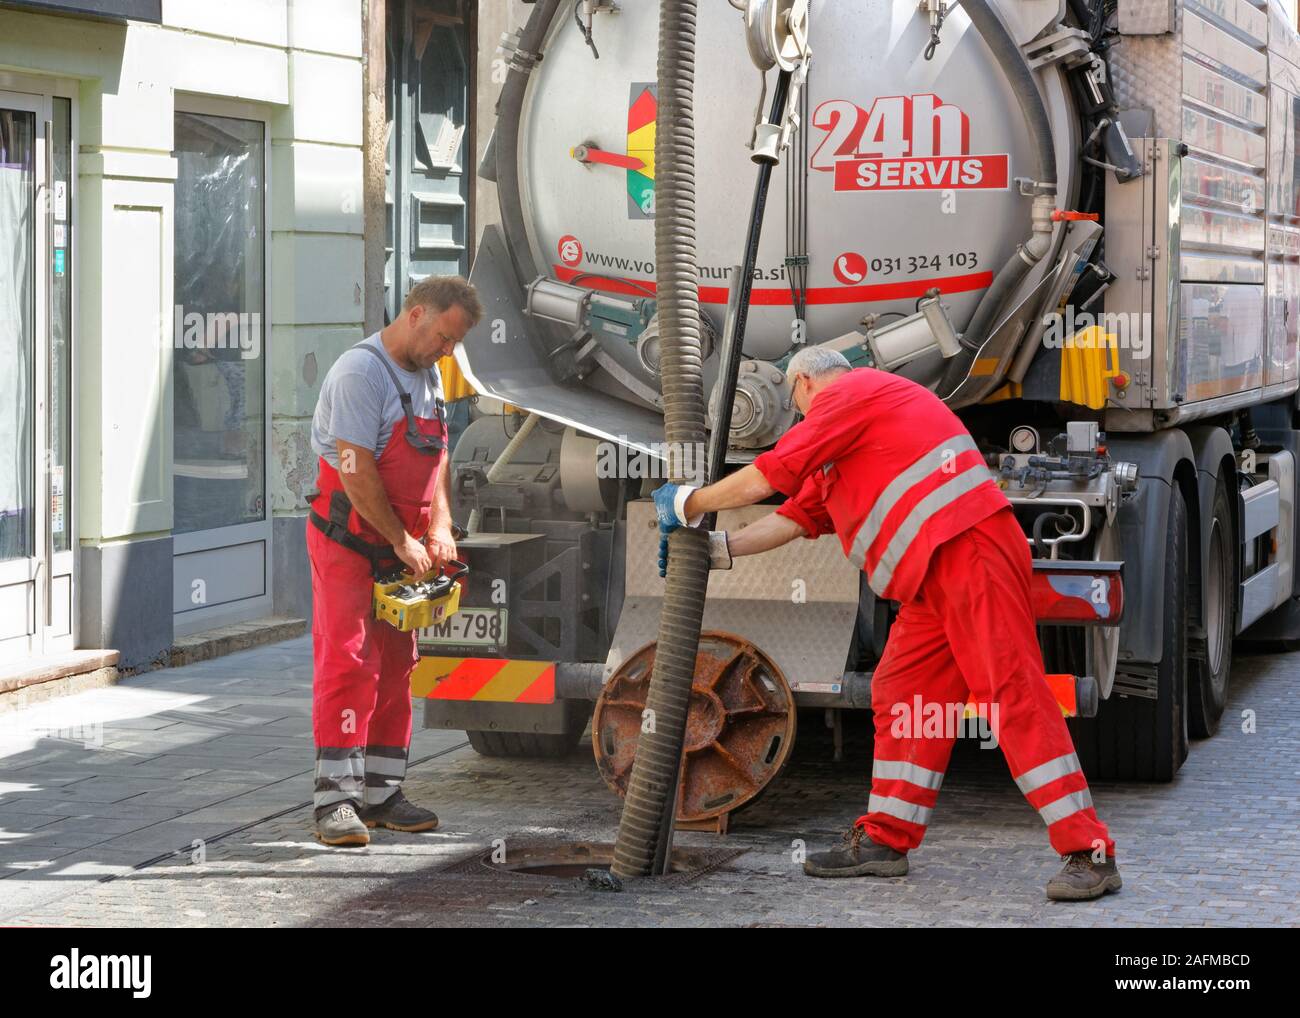 CELJE, Slovenia - August 1, 2019: Two workmen inserting a hose in a manhole for sewage system maintenance in a downtown street Stock Photo